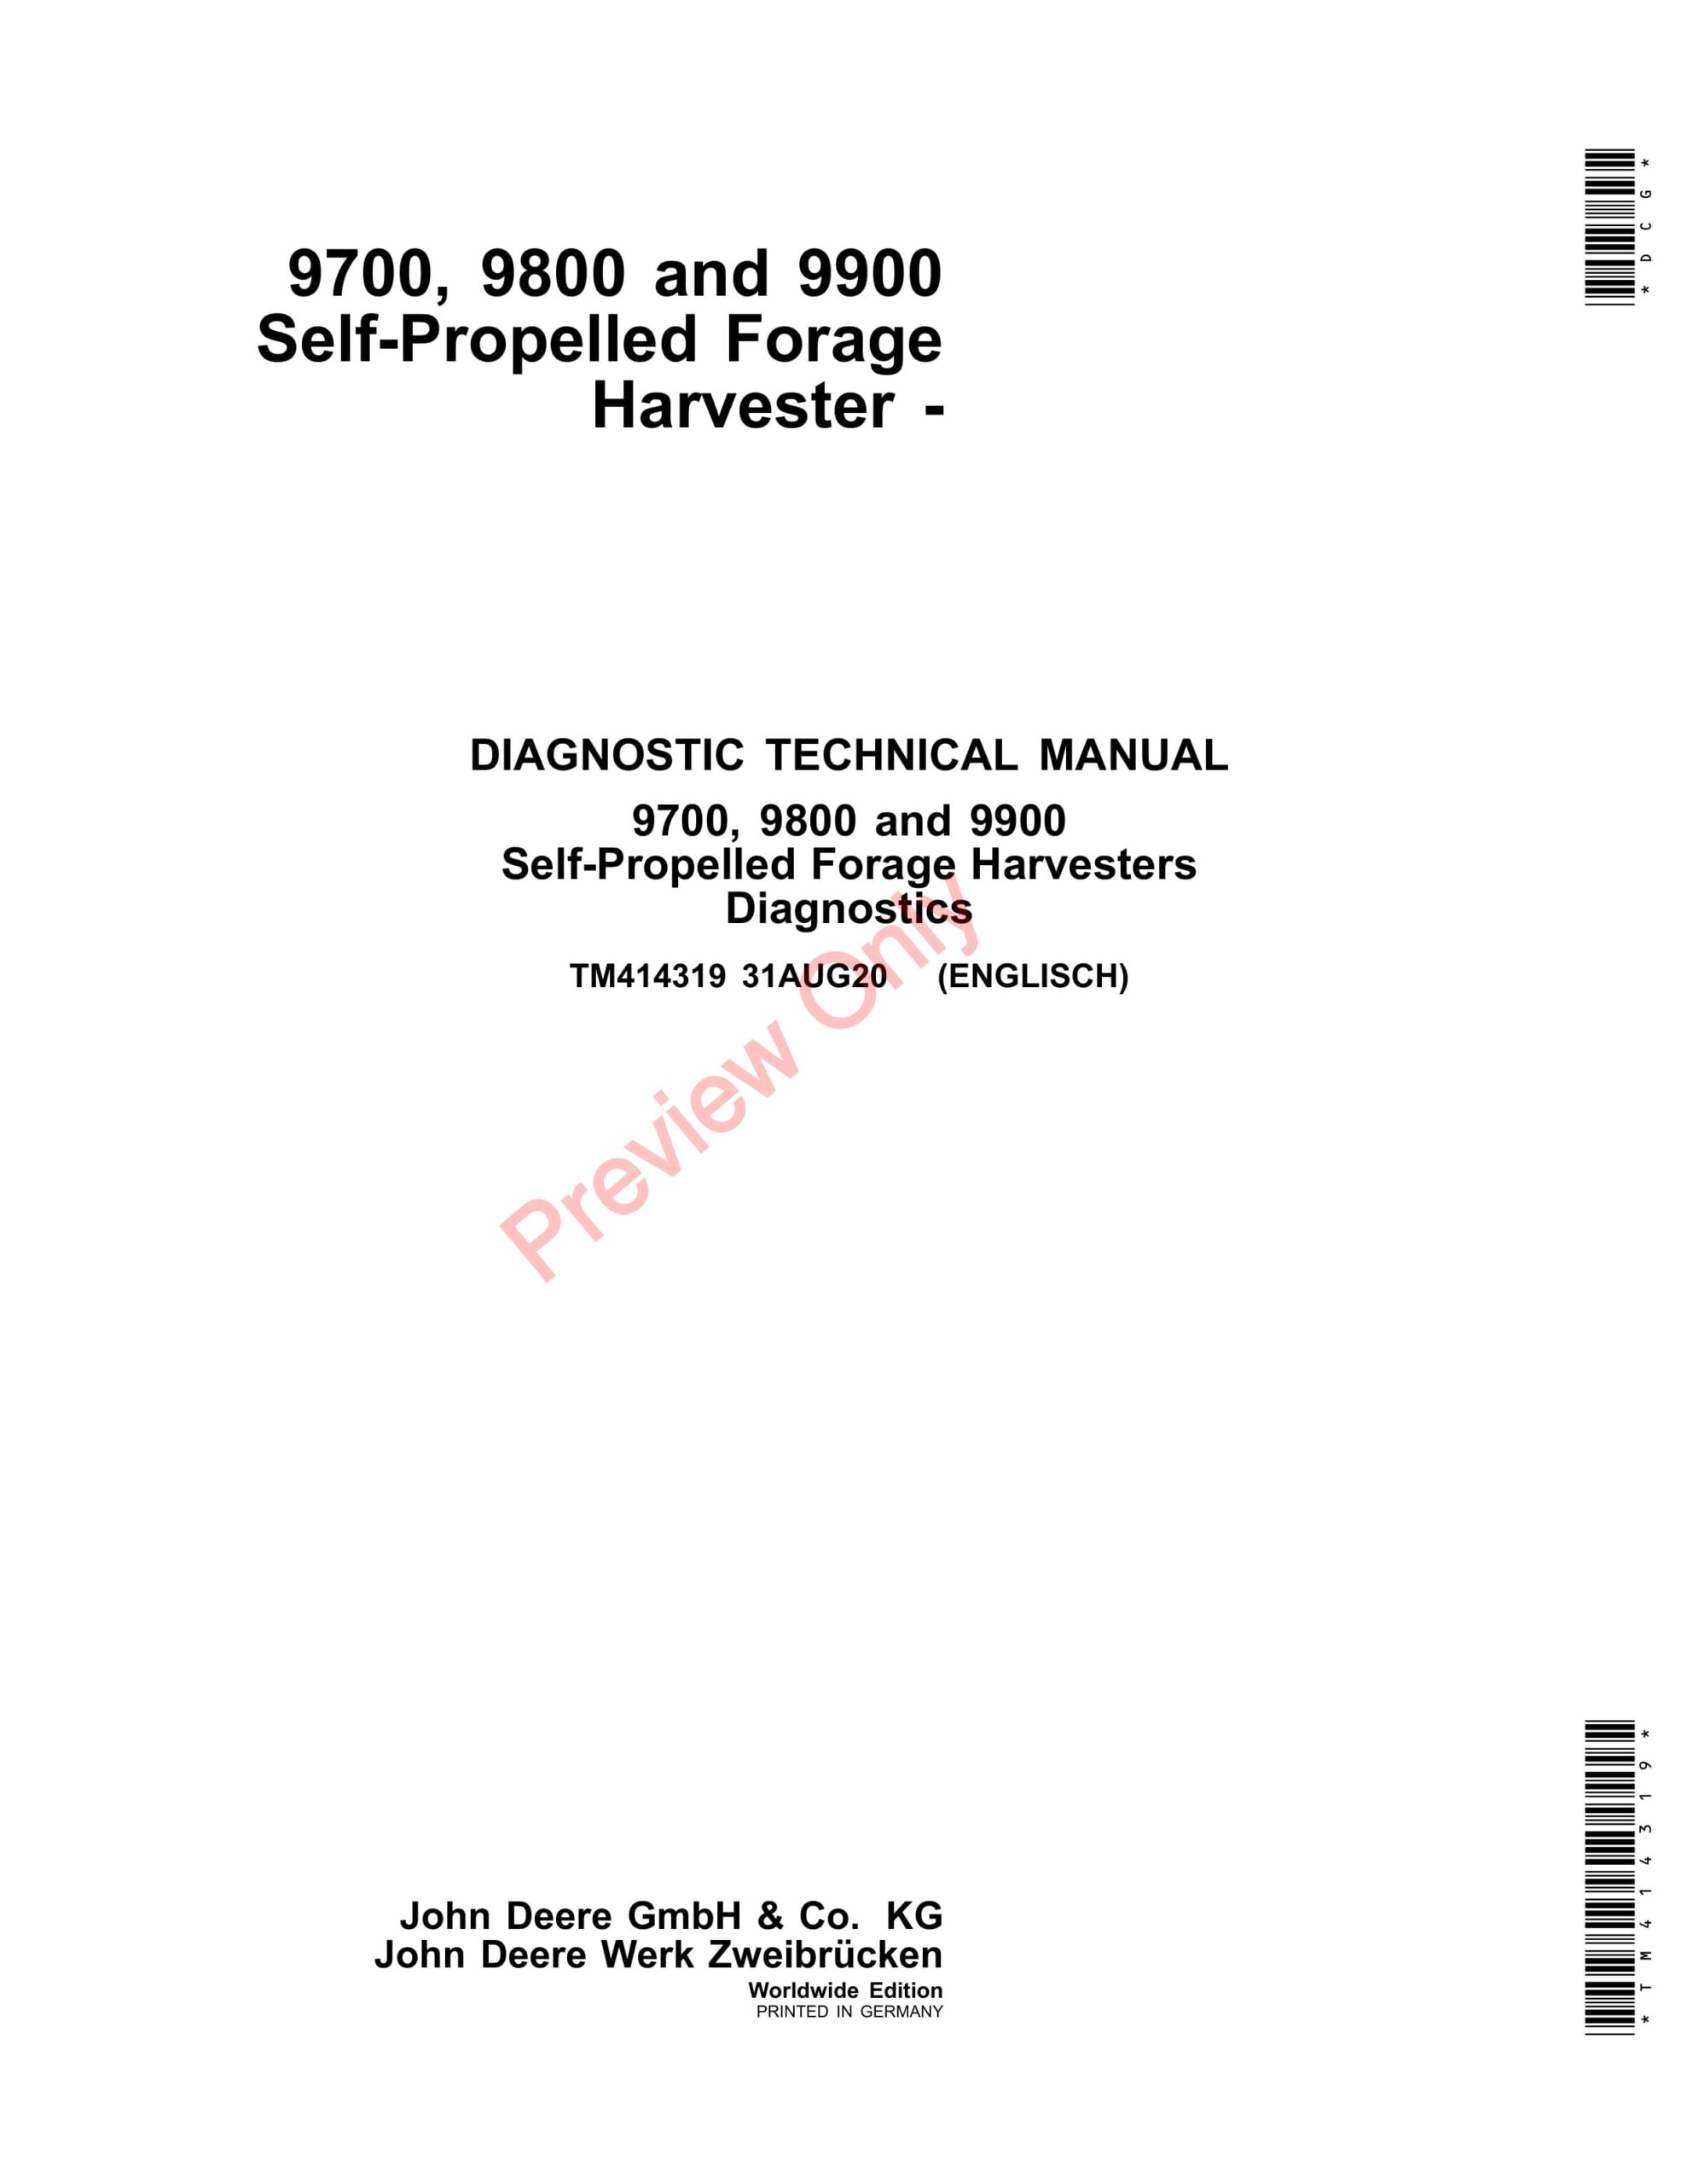 John Deere 9700, 9800 and 9900 Self-Propelled Forage Harvester Diagnostic Technical Manual TM414319 31AUG20-1